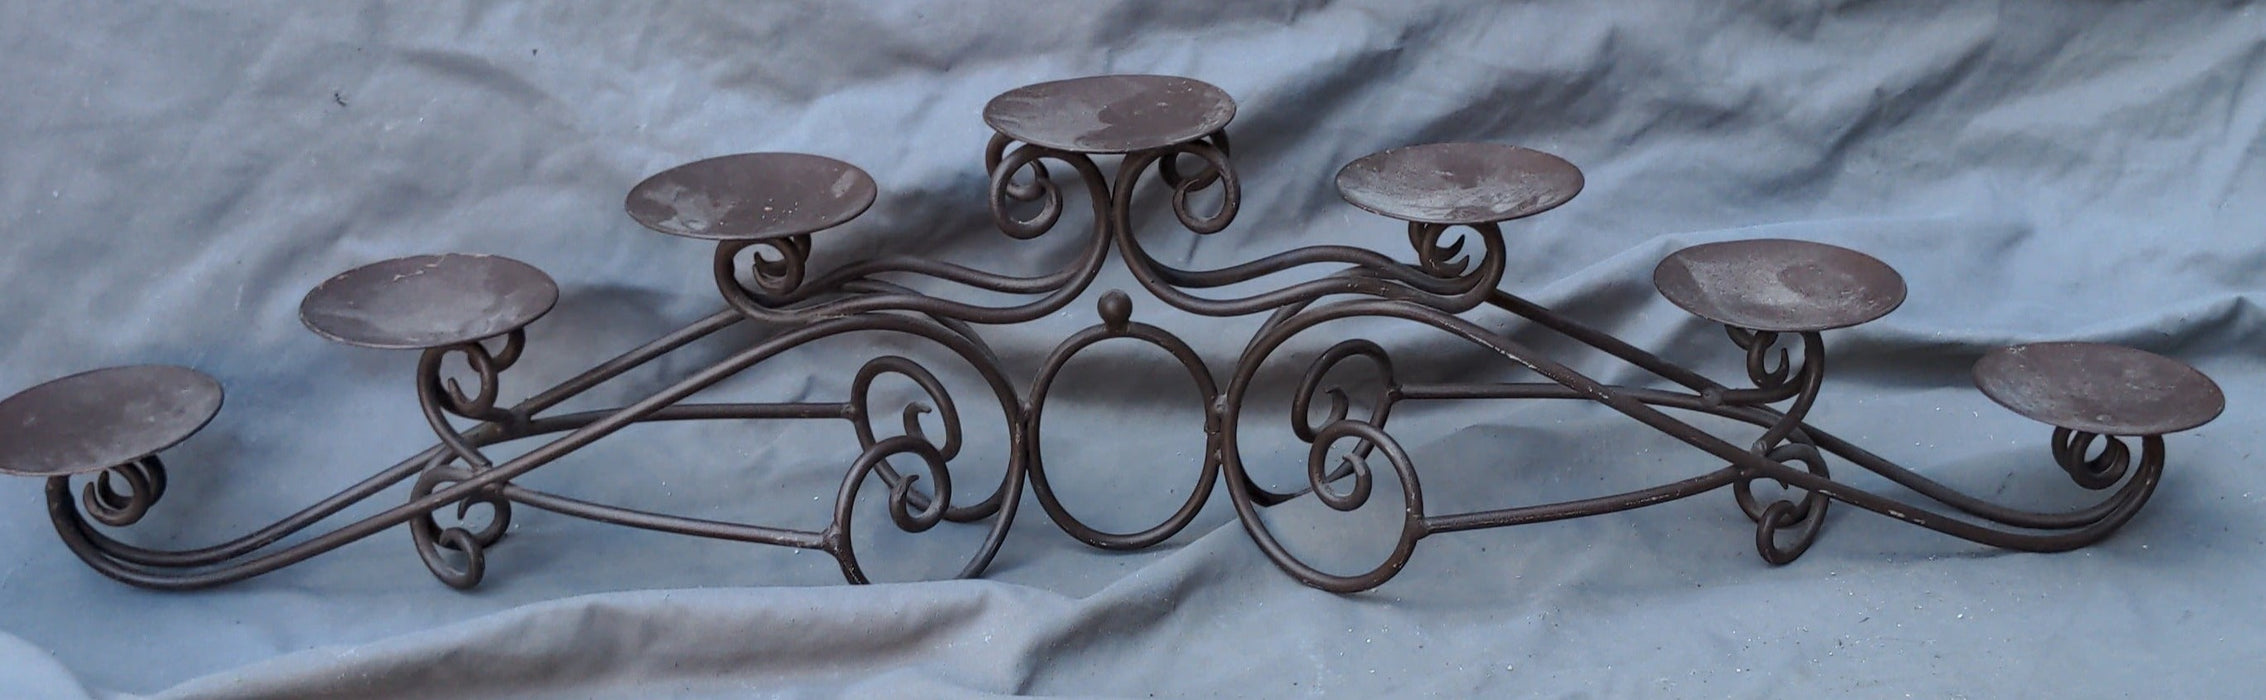 SEVEN LIGHT BENT IRON ARCHED CANDLE STAND